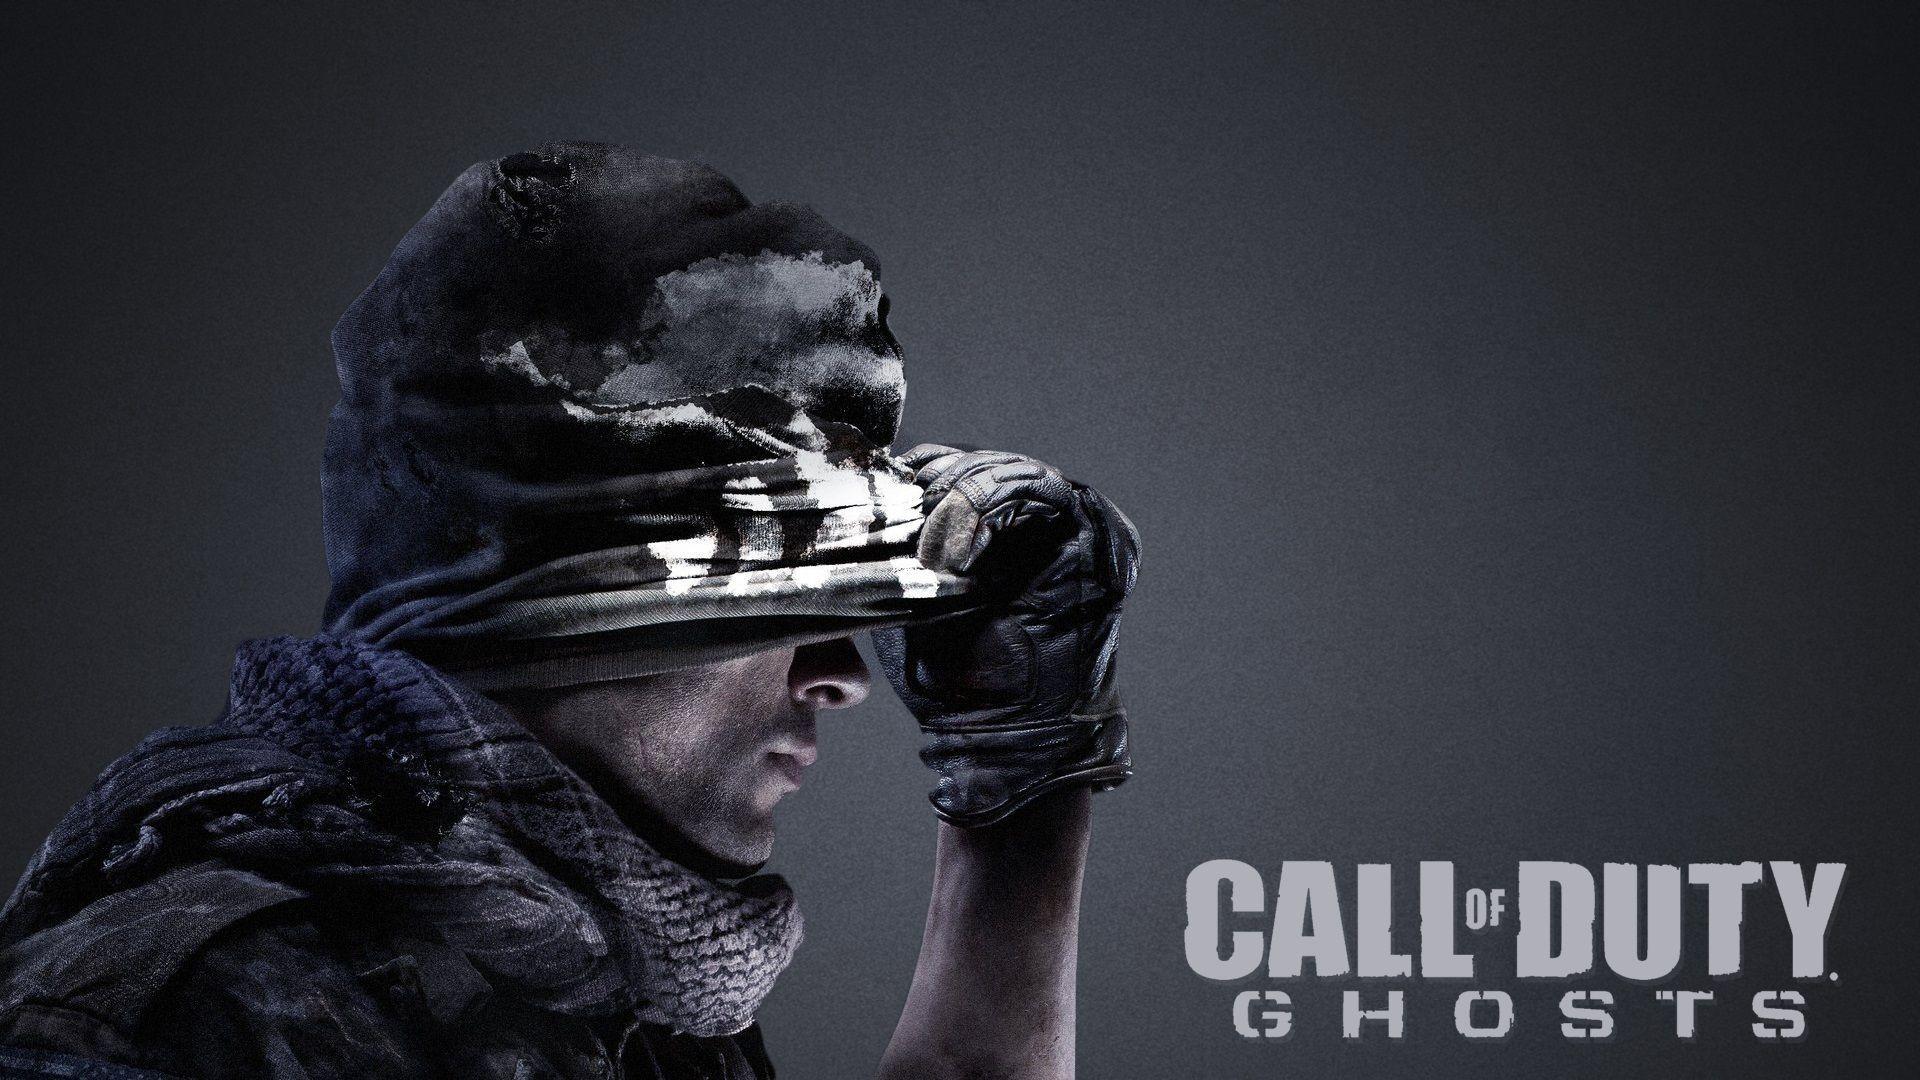 Call Of Duty Ghosts 1080p Wallpaper. All Best Image Collection